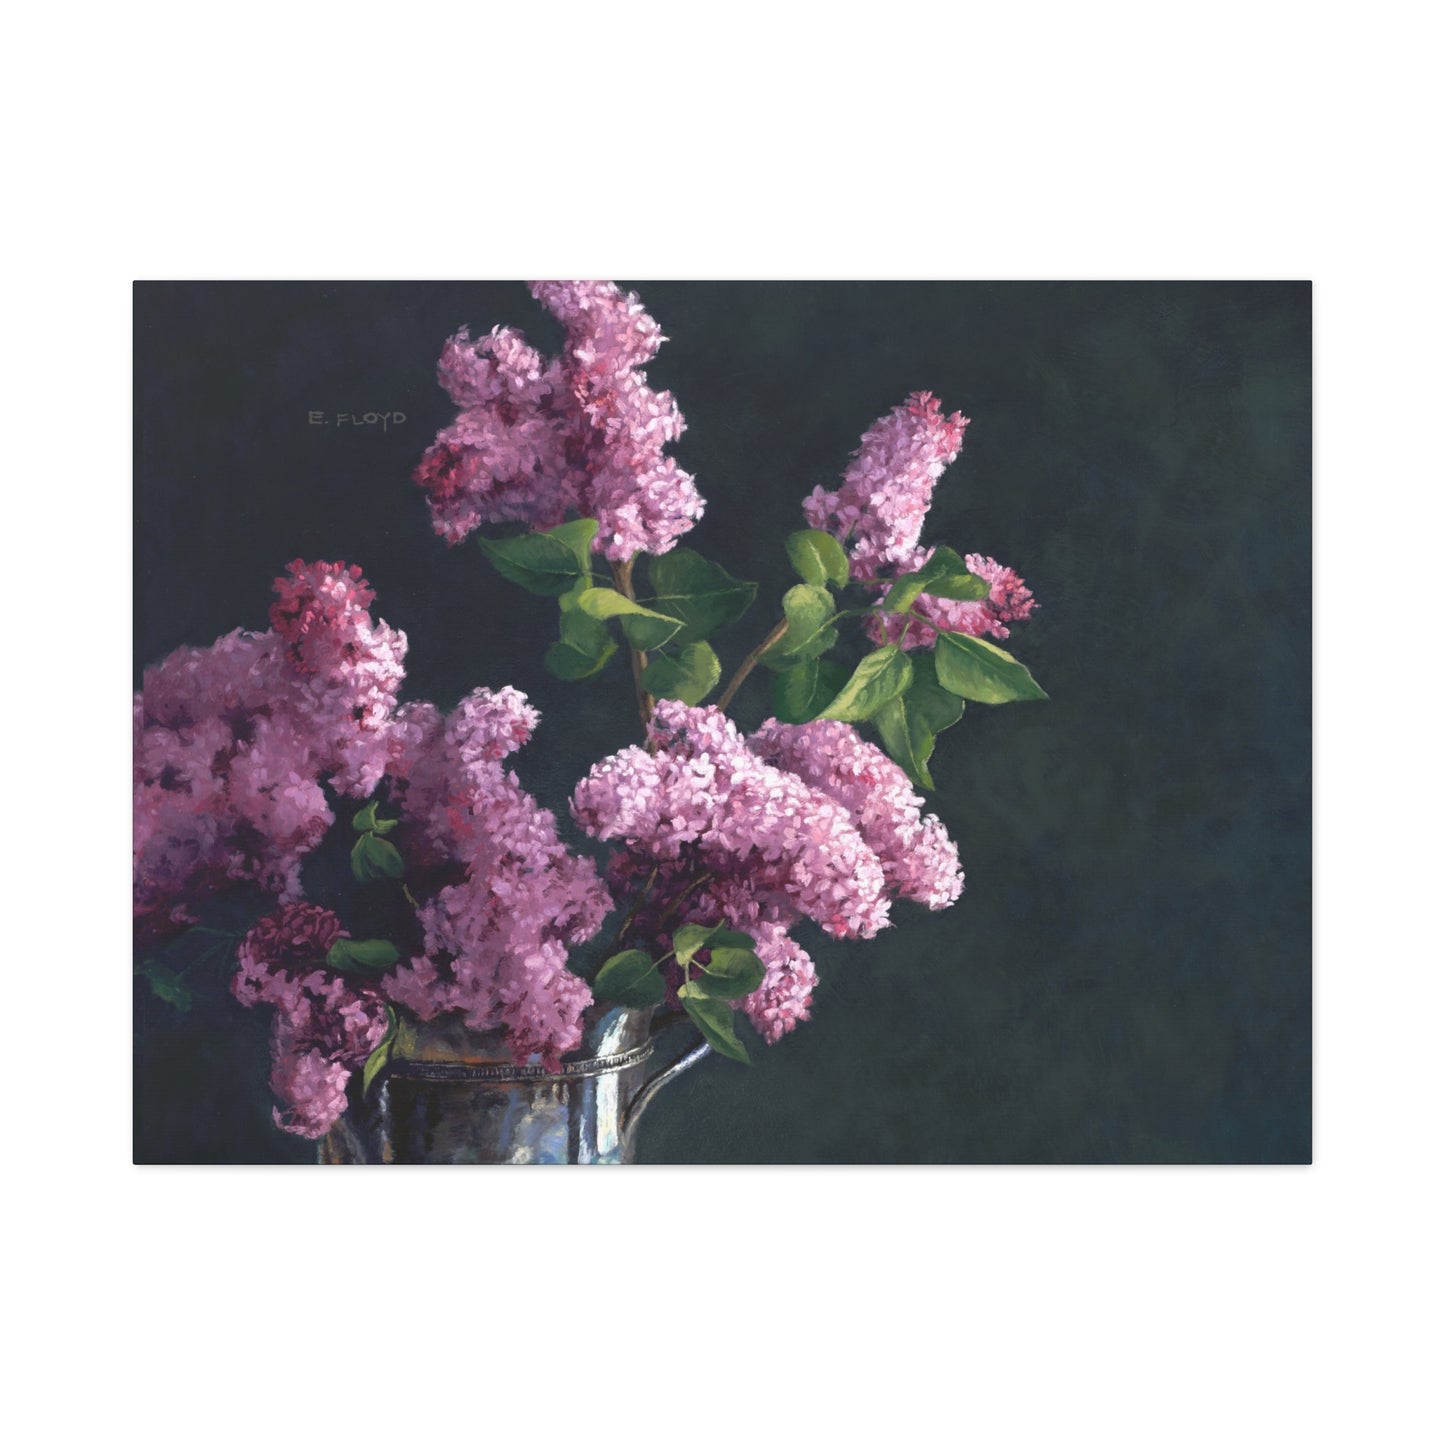 Lilacs in Tarnished Silver, Floral Art Canvas Print, Stretched 1.25" Deep